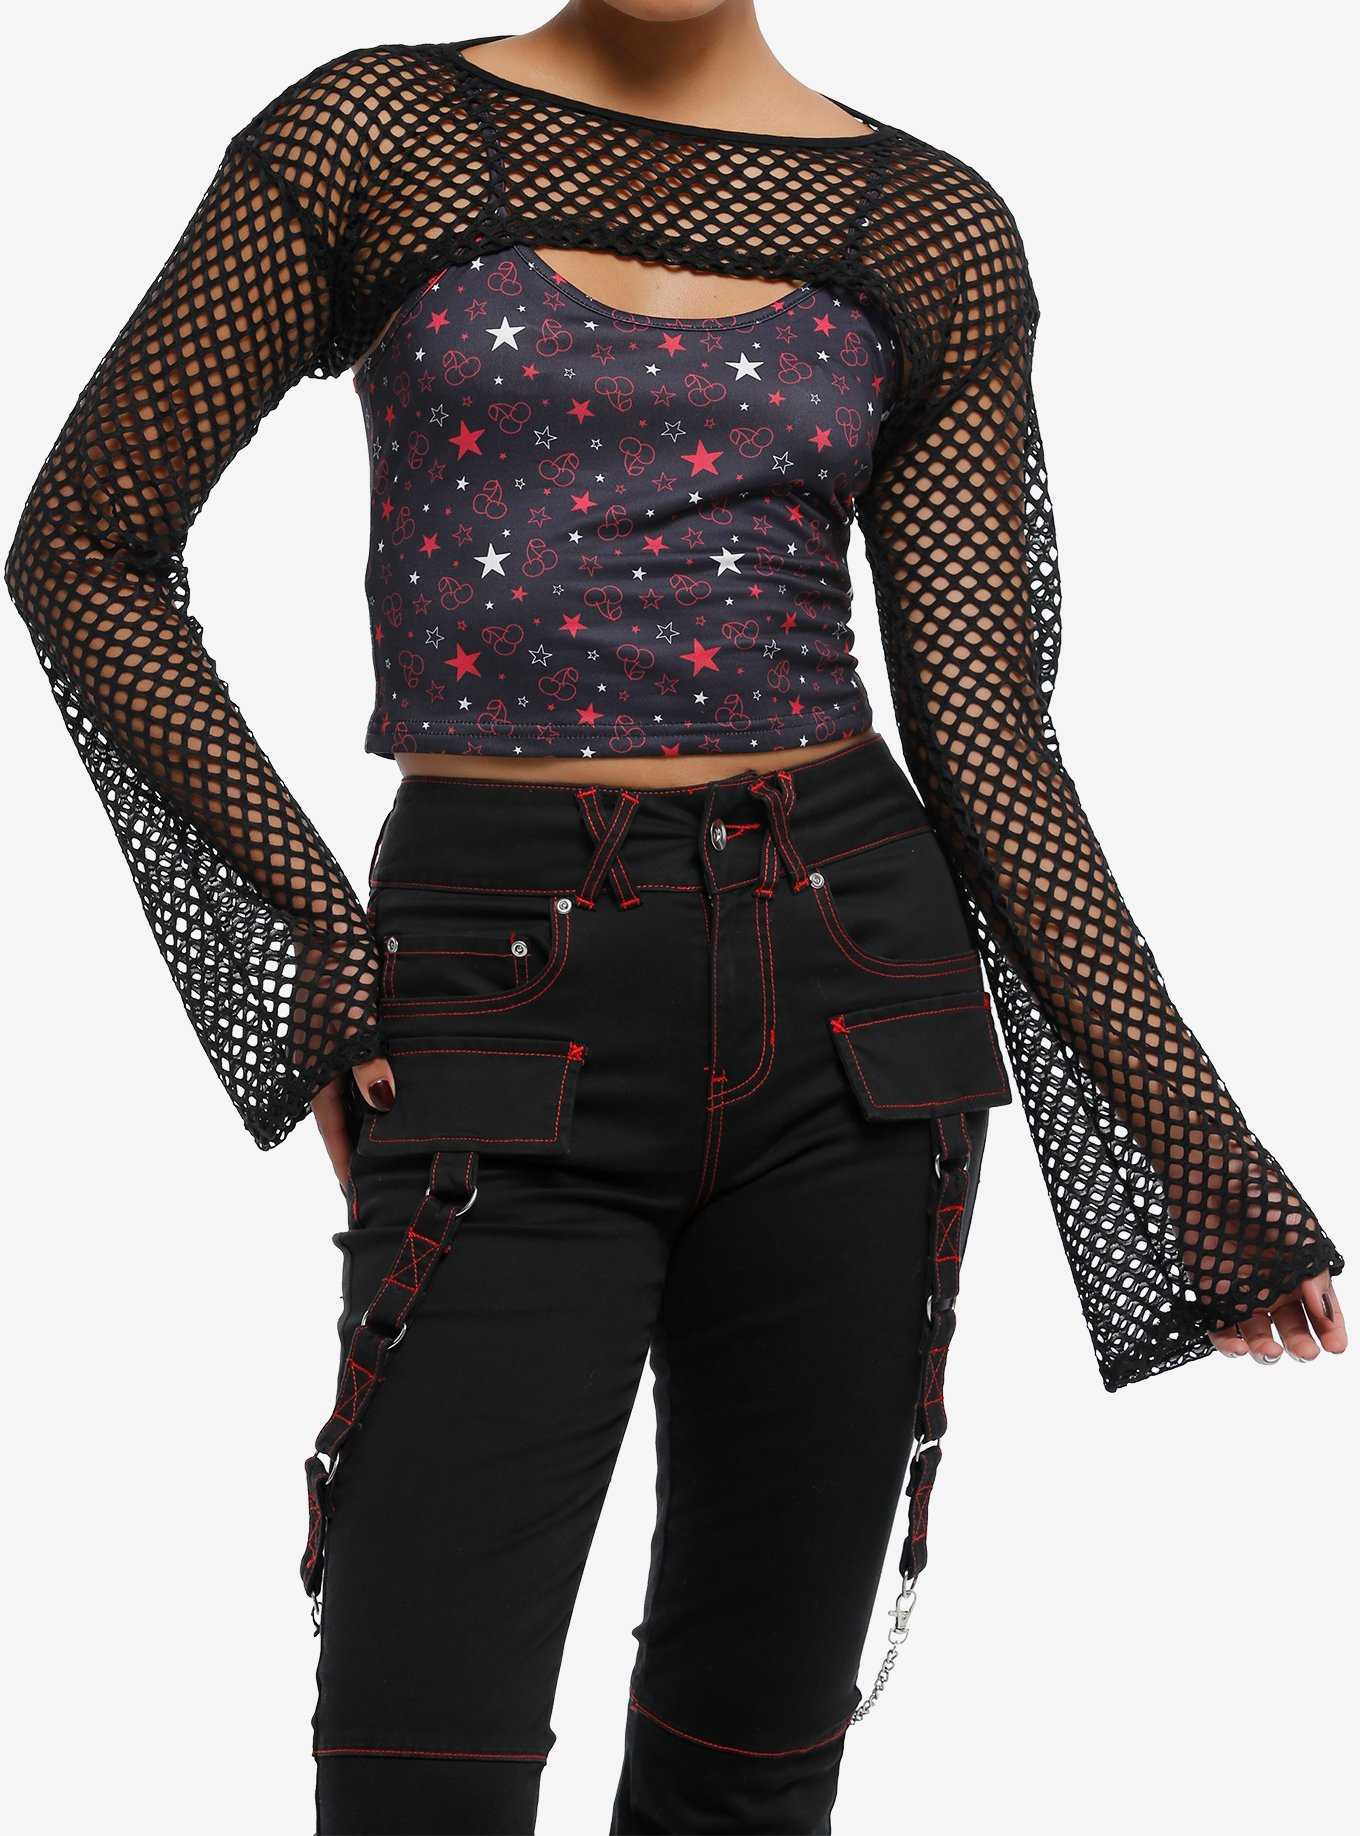 Does anyone have any idea where to find a fishnet shirt and